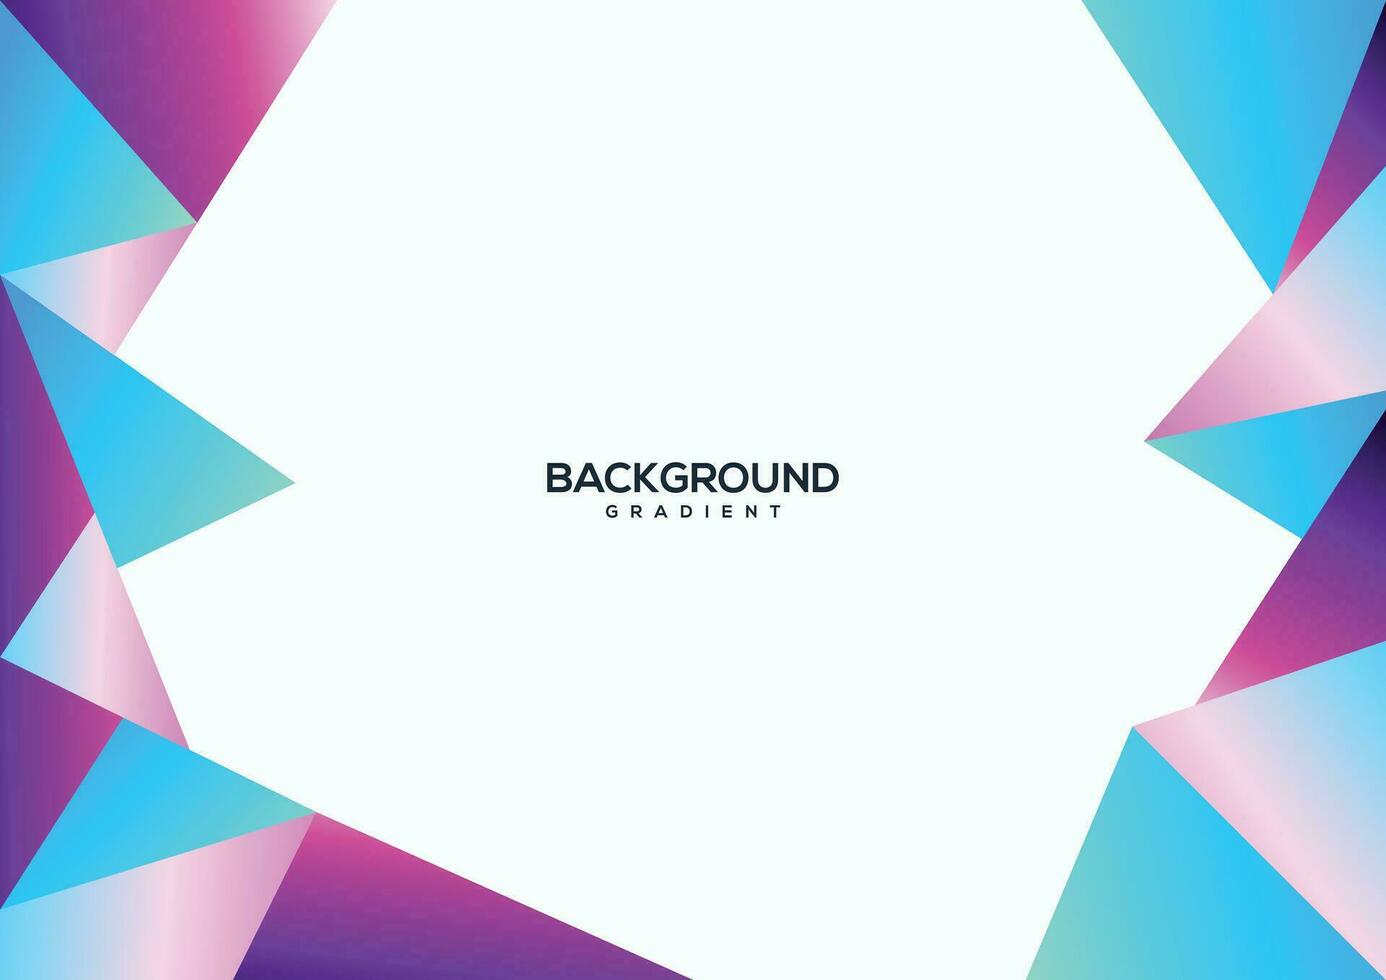 Geometric background with colorful vector